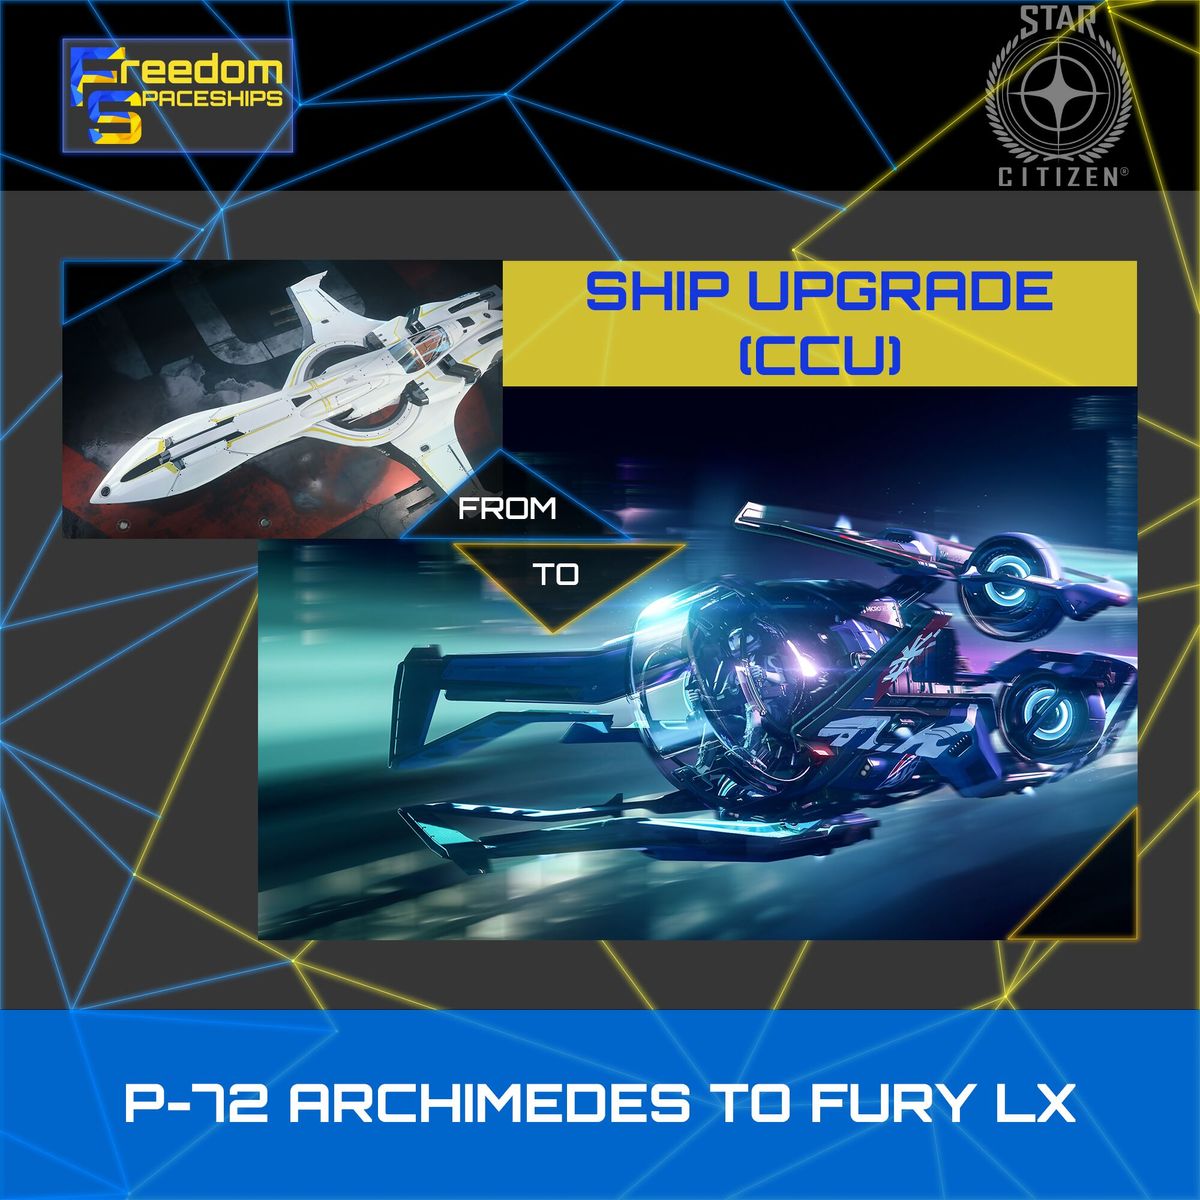 Upgrade - P-72 Archimedes to Fury LX